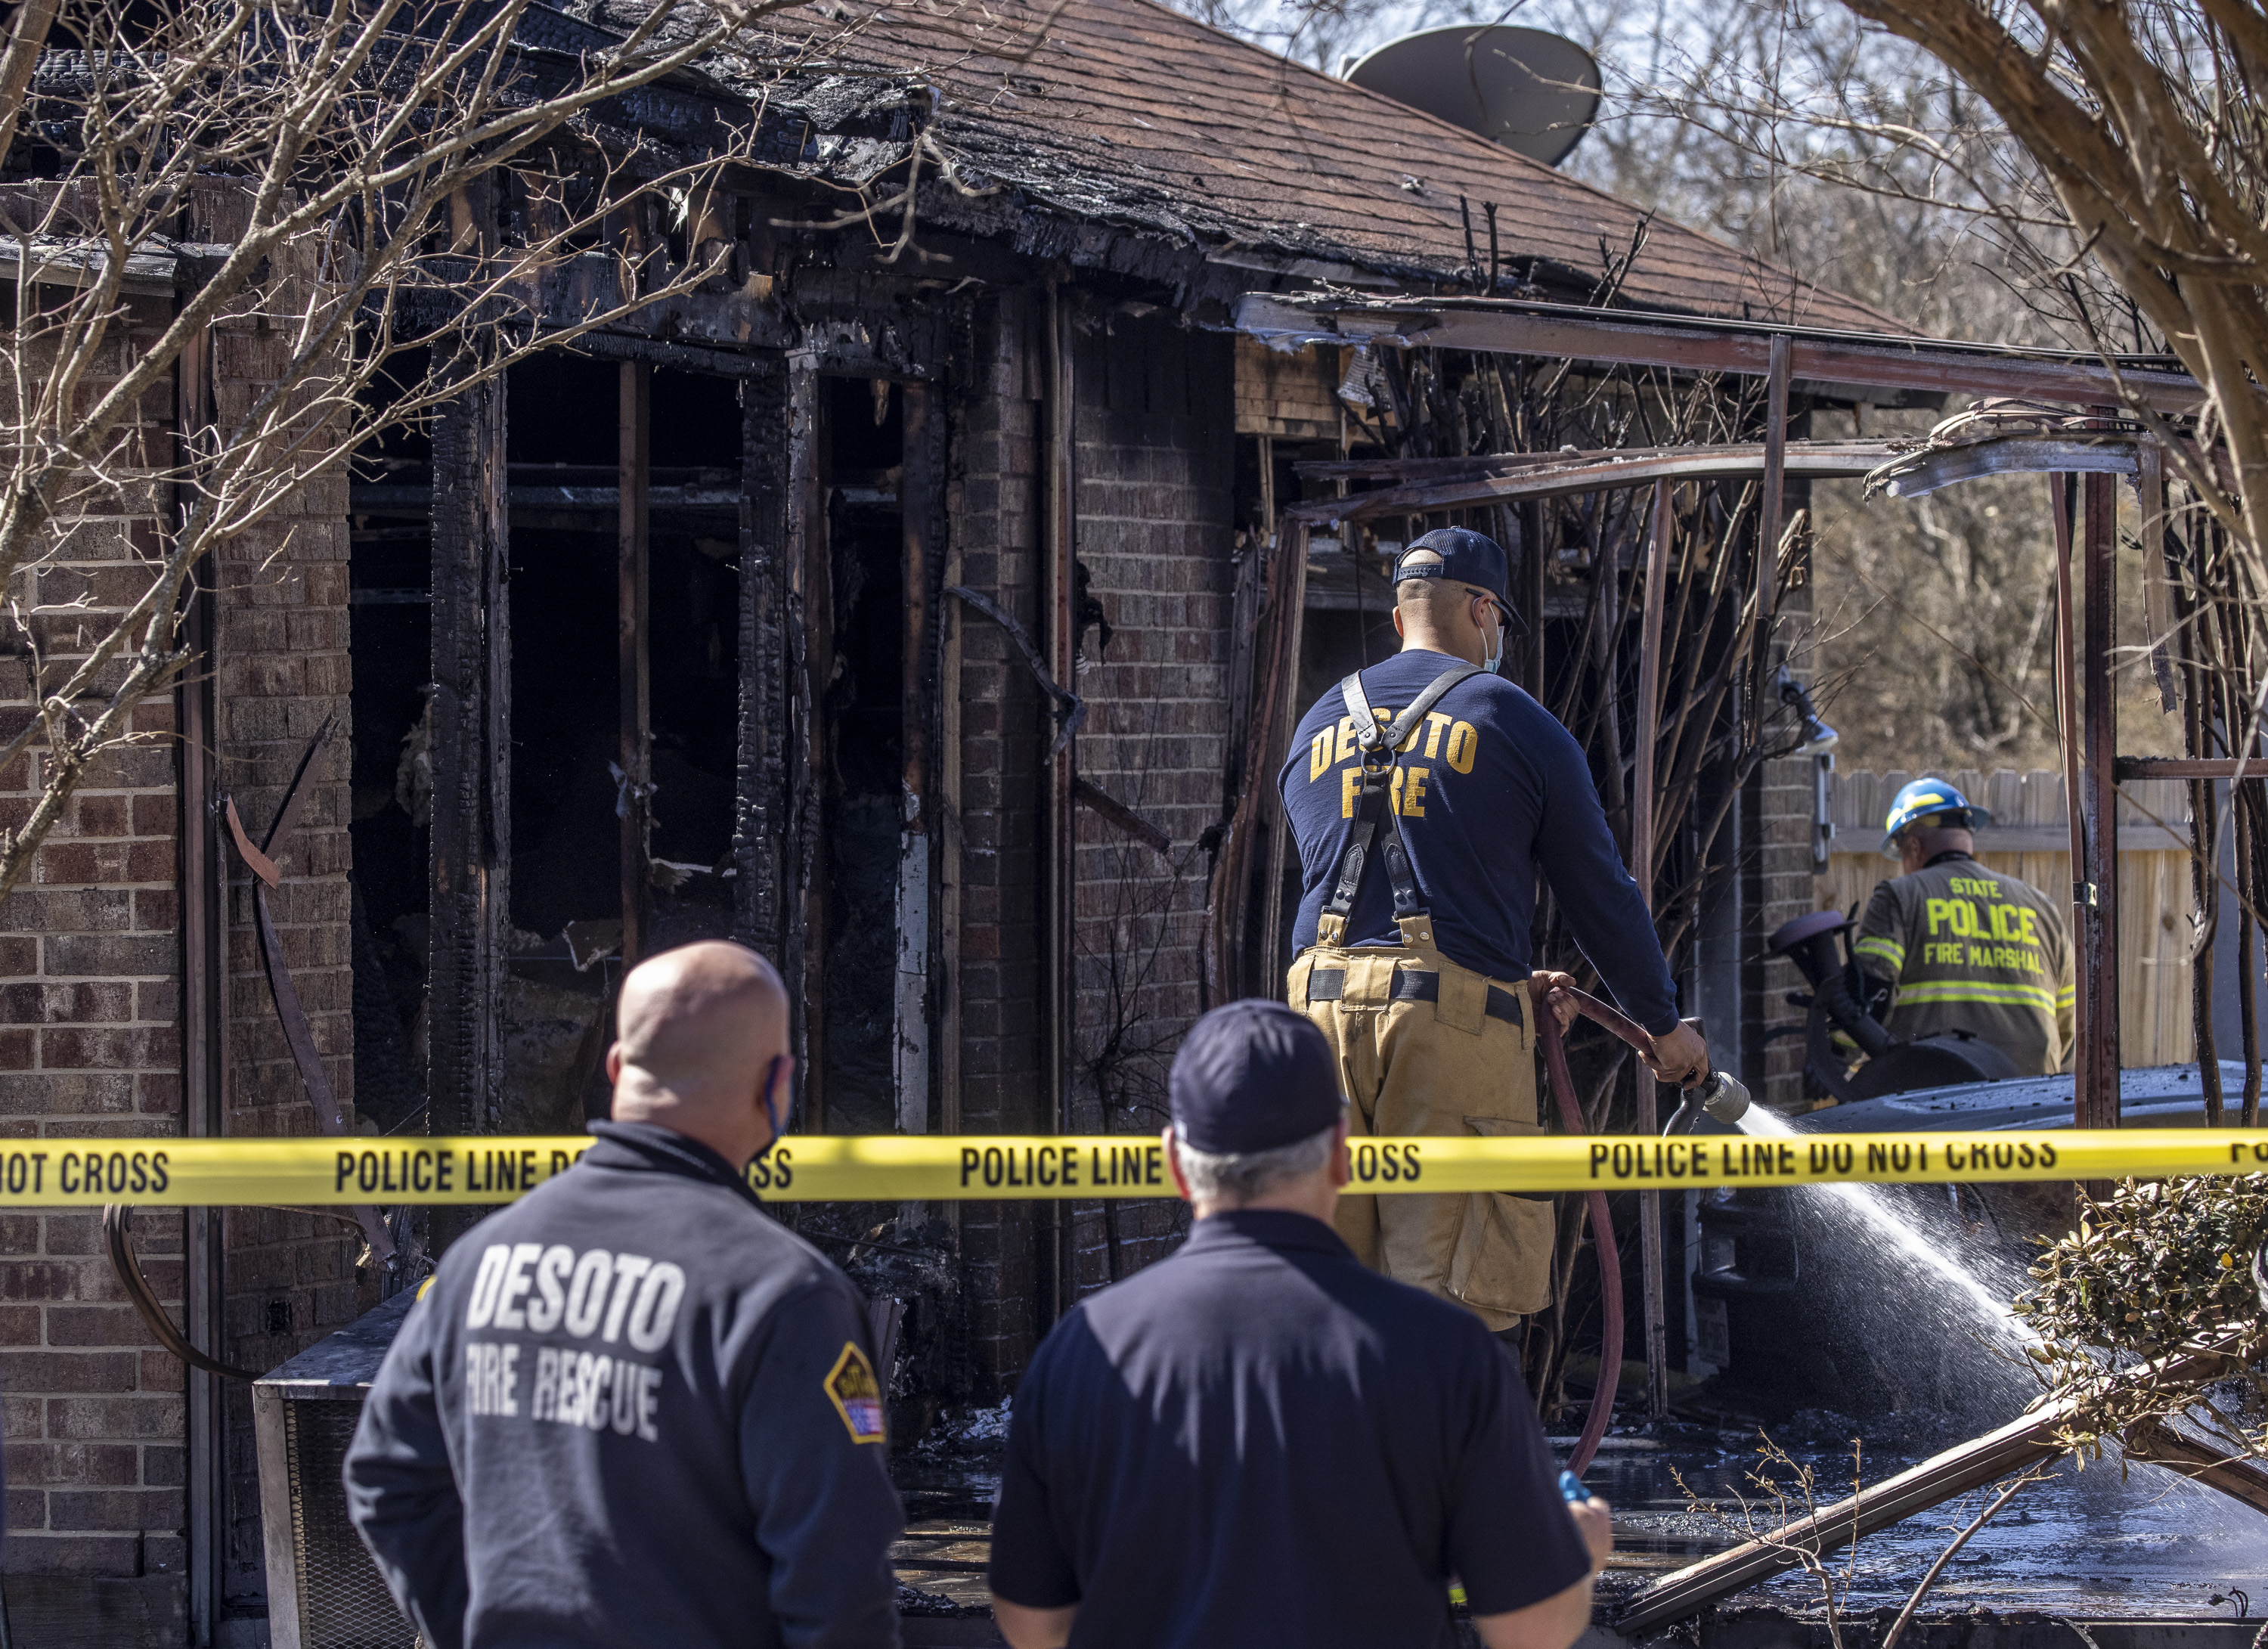 2 young children dead in DeSoto house fire, officials